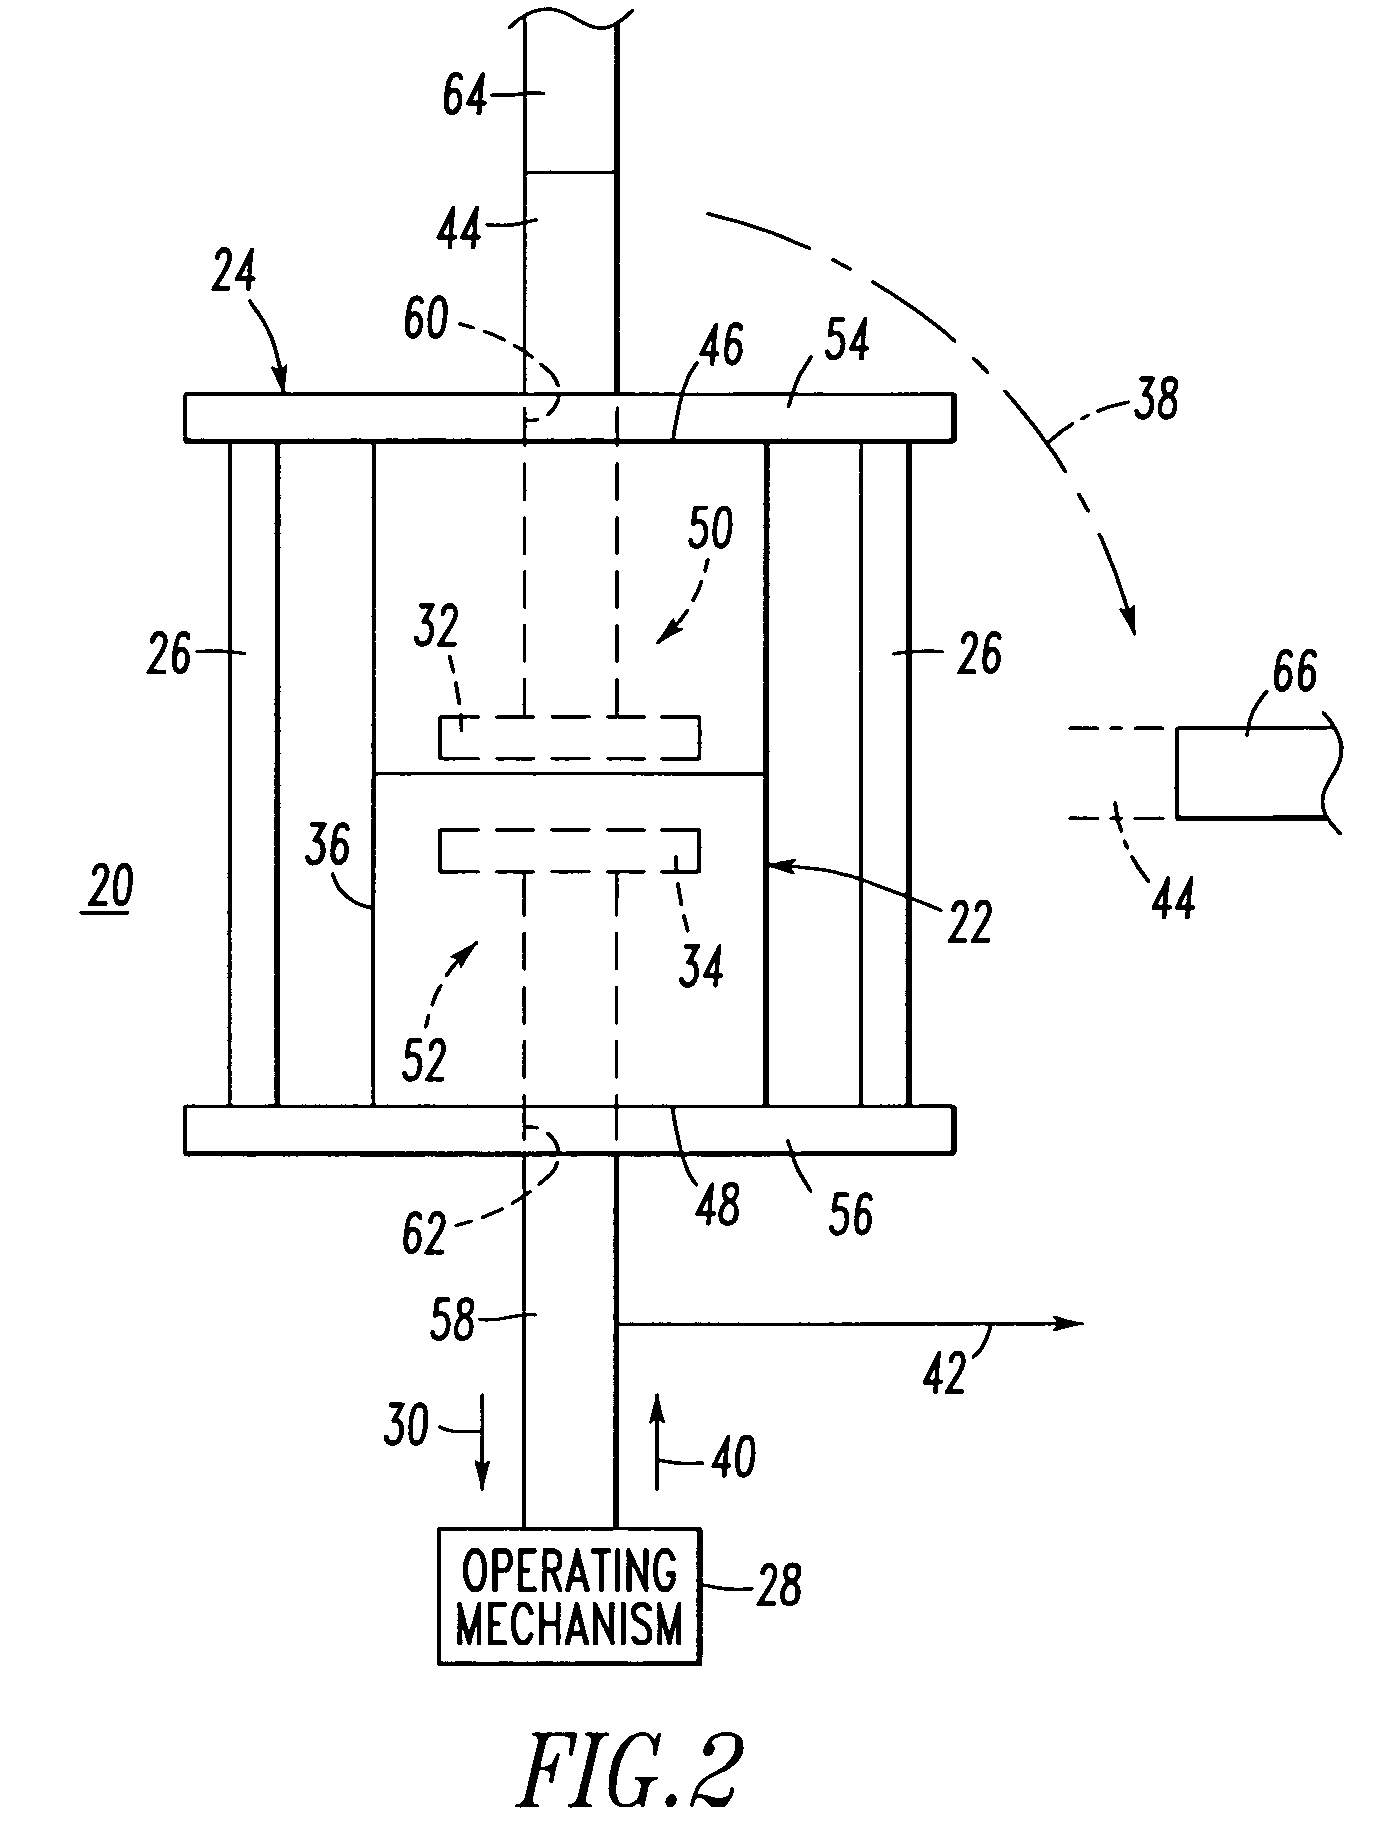 Three-position vacuum interrupter disconnect switch providing current interruption, disconnection and grounding